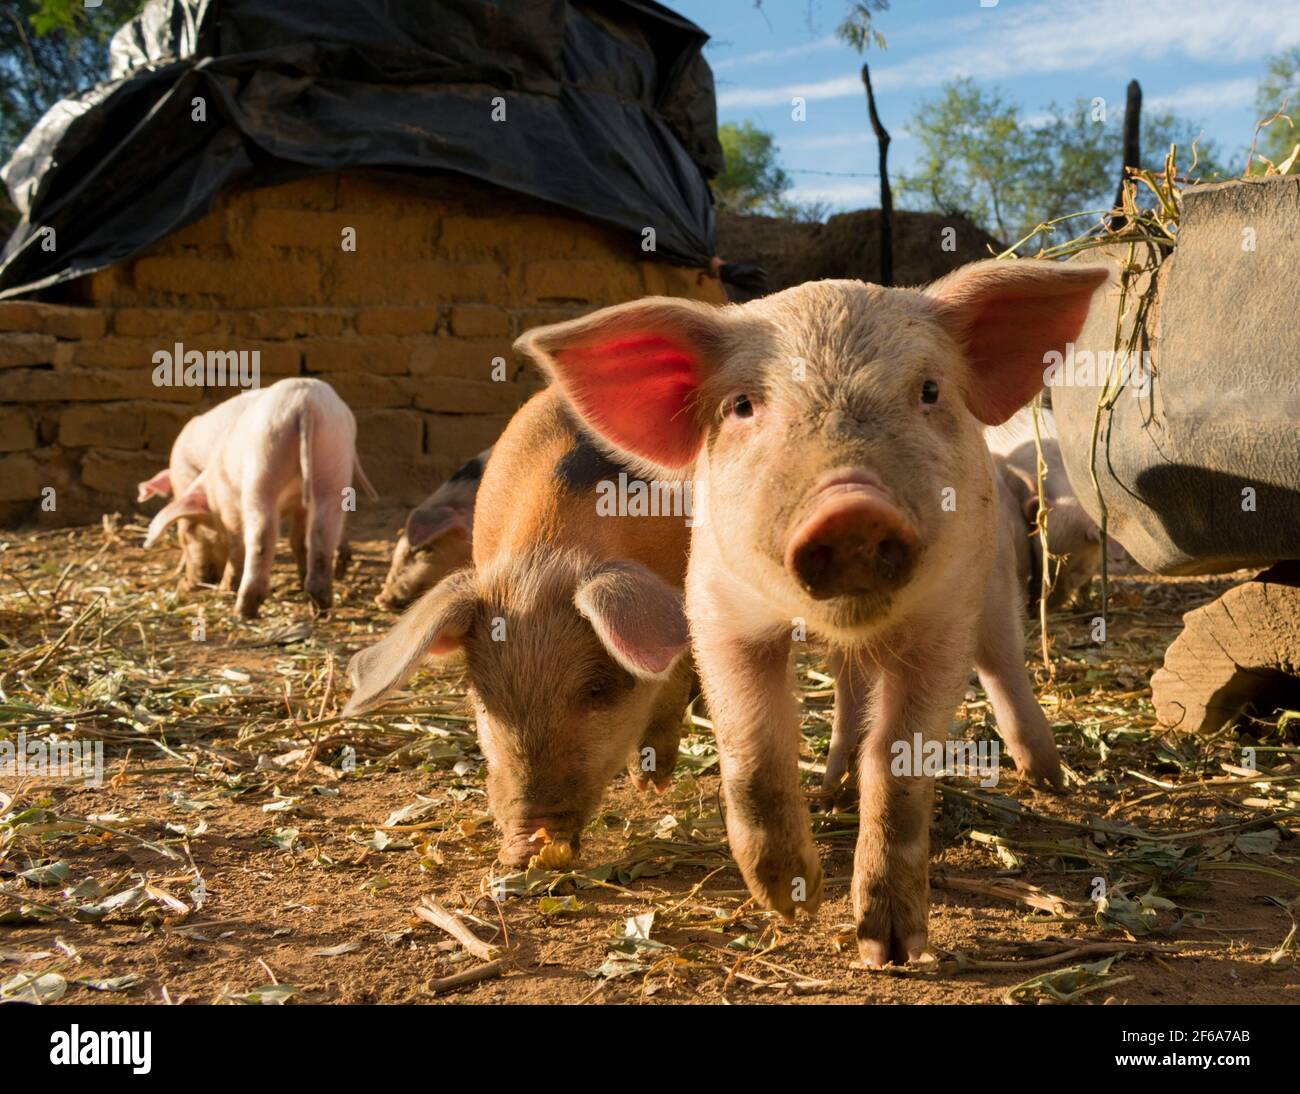 Little piggy with a curious look Stock Photo